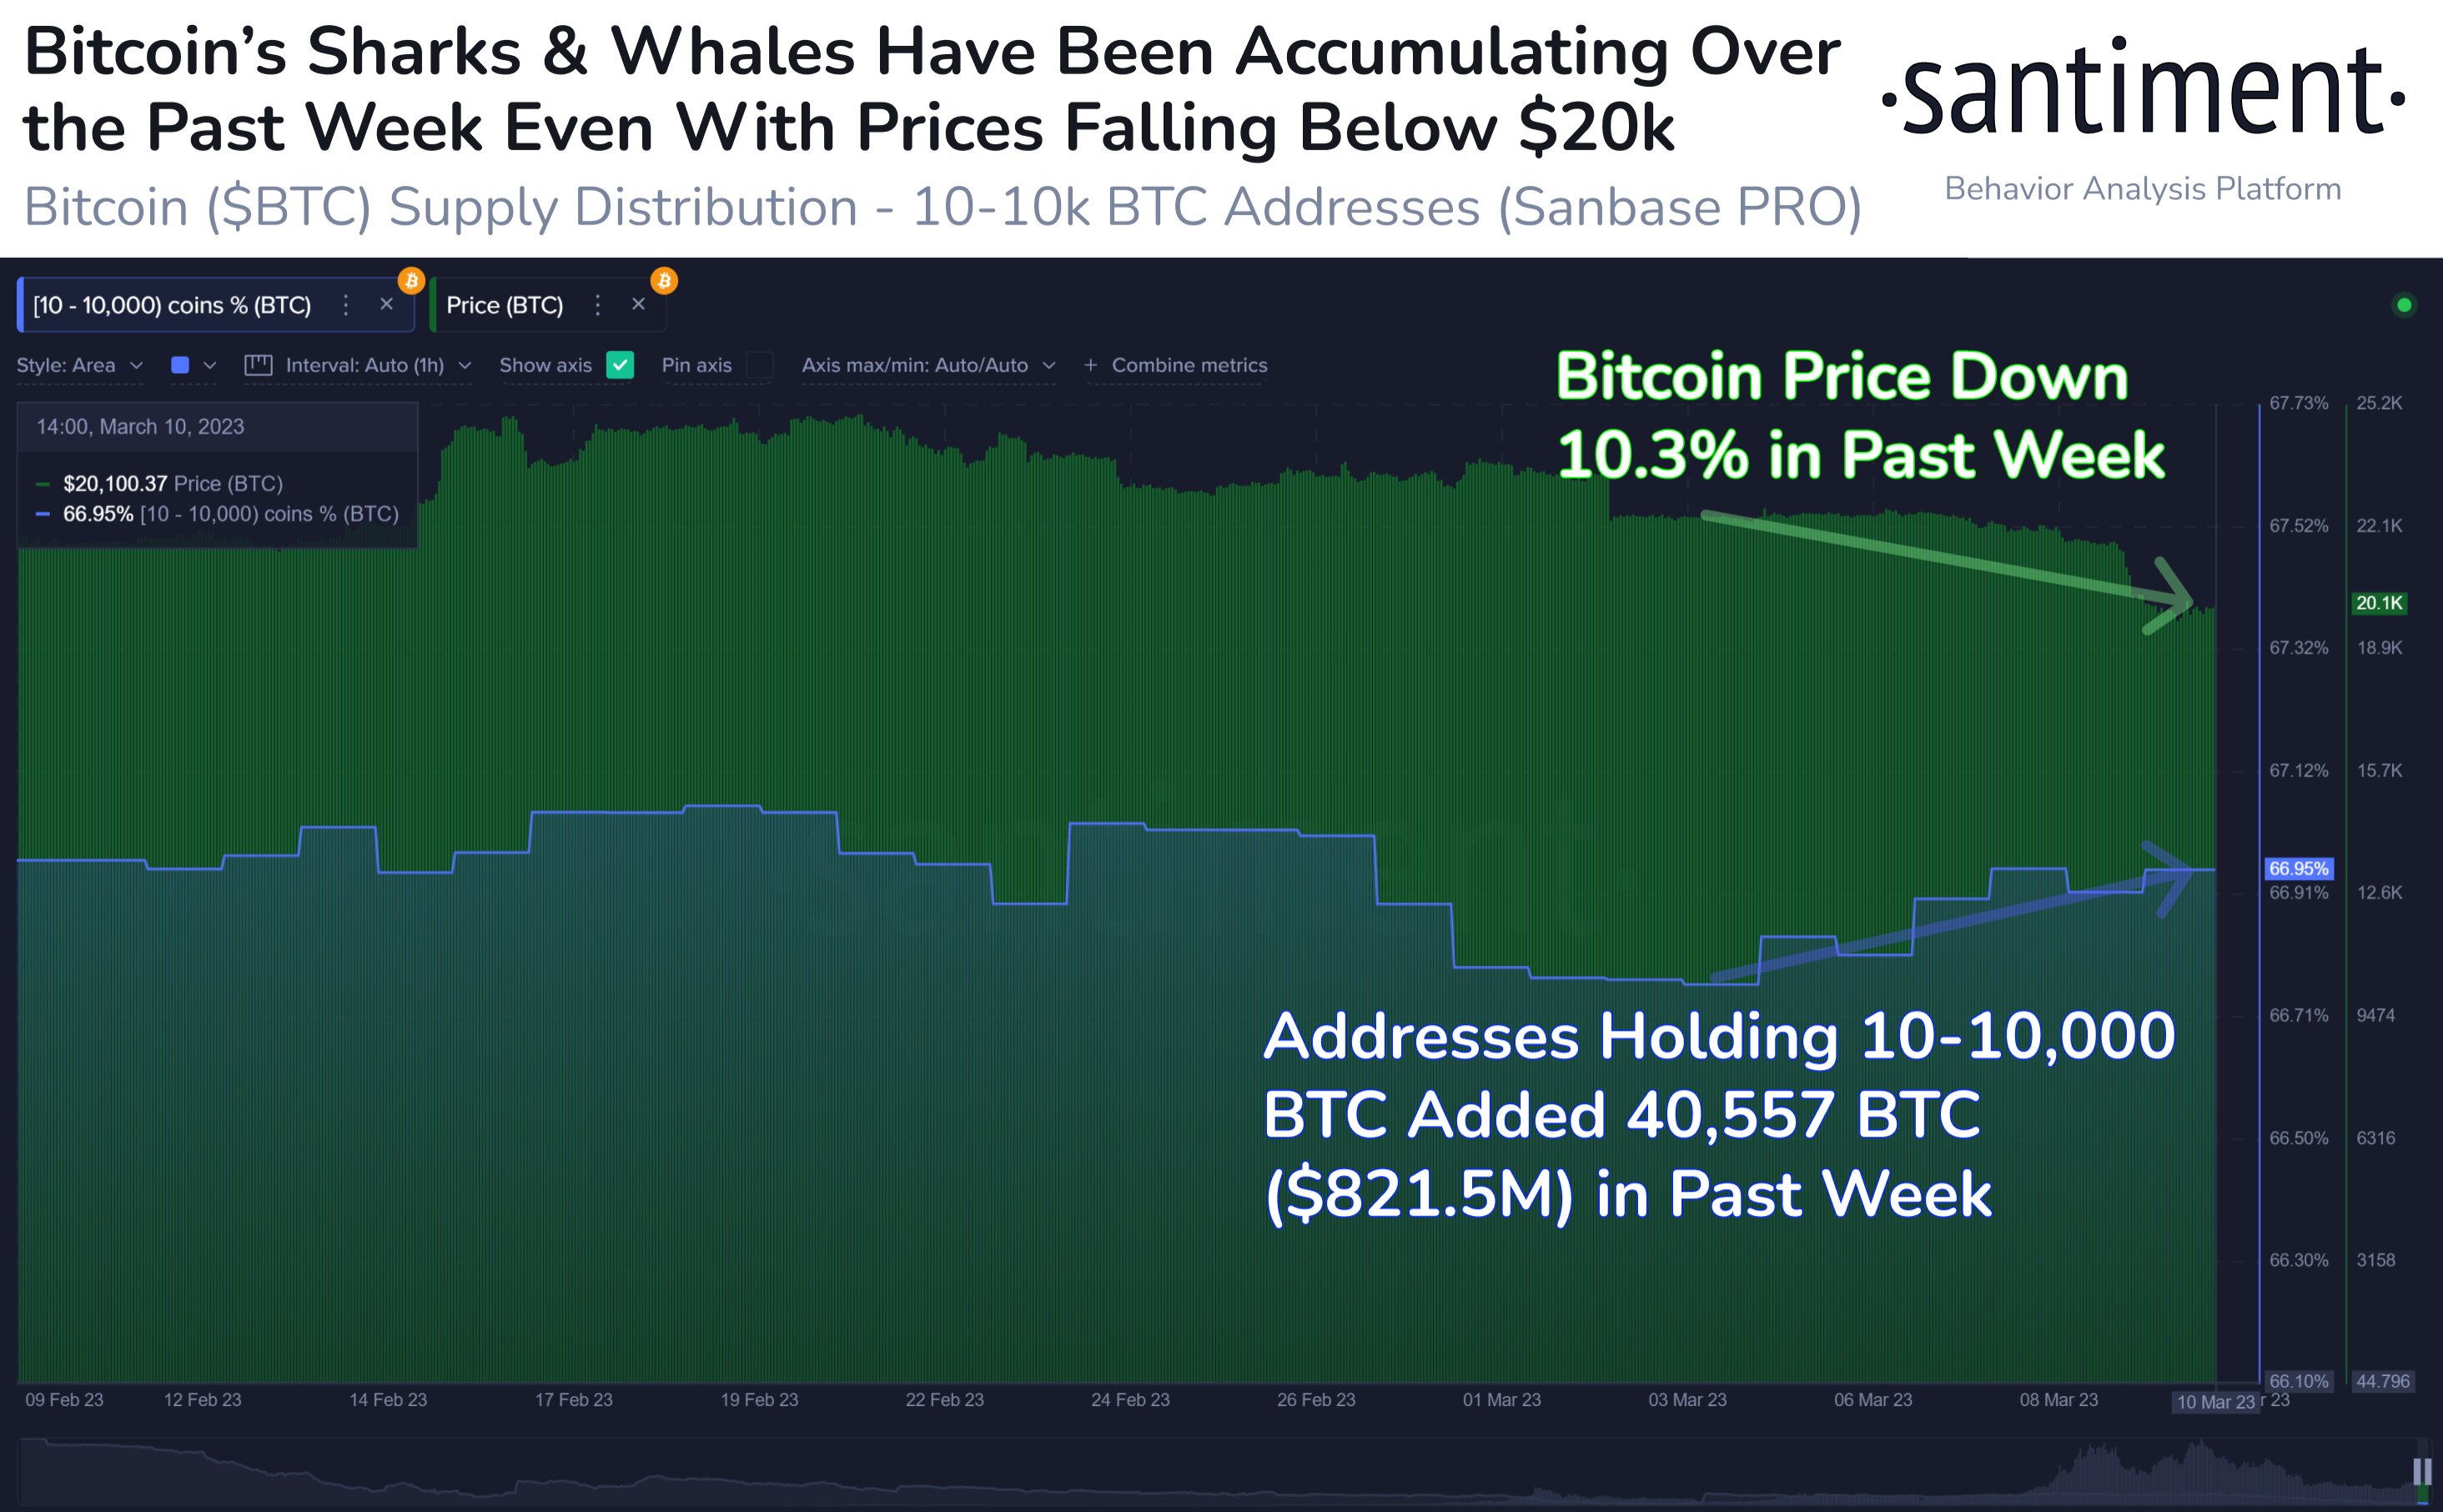 Bitcoin accumulation by sharks and whales